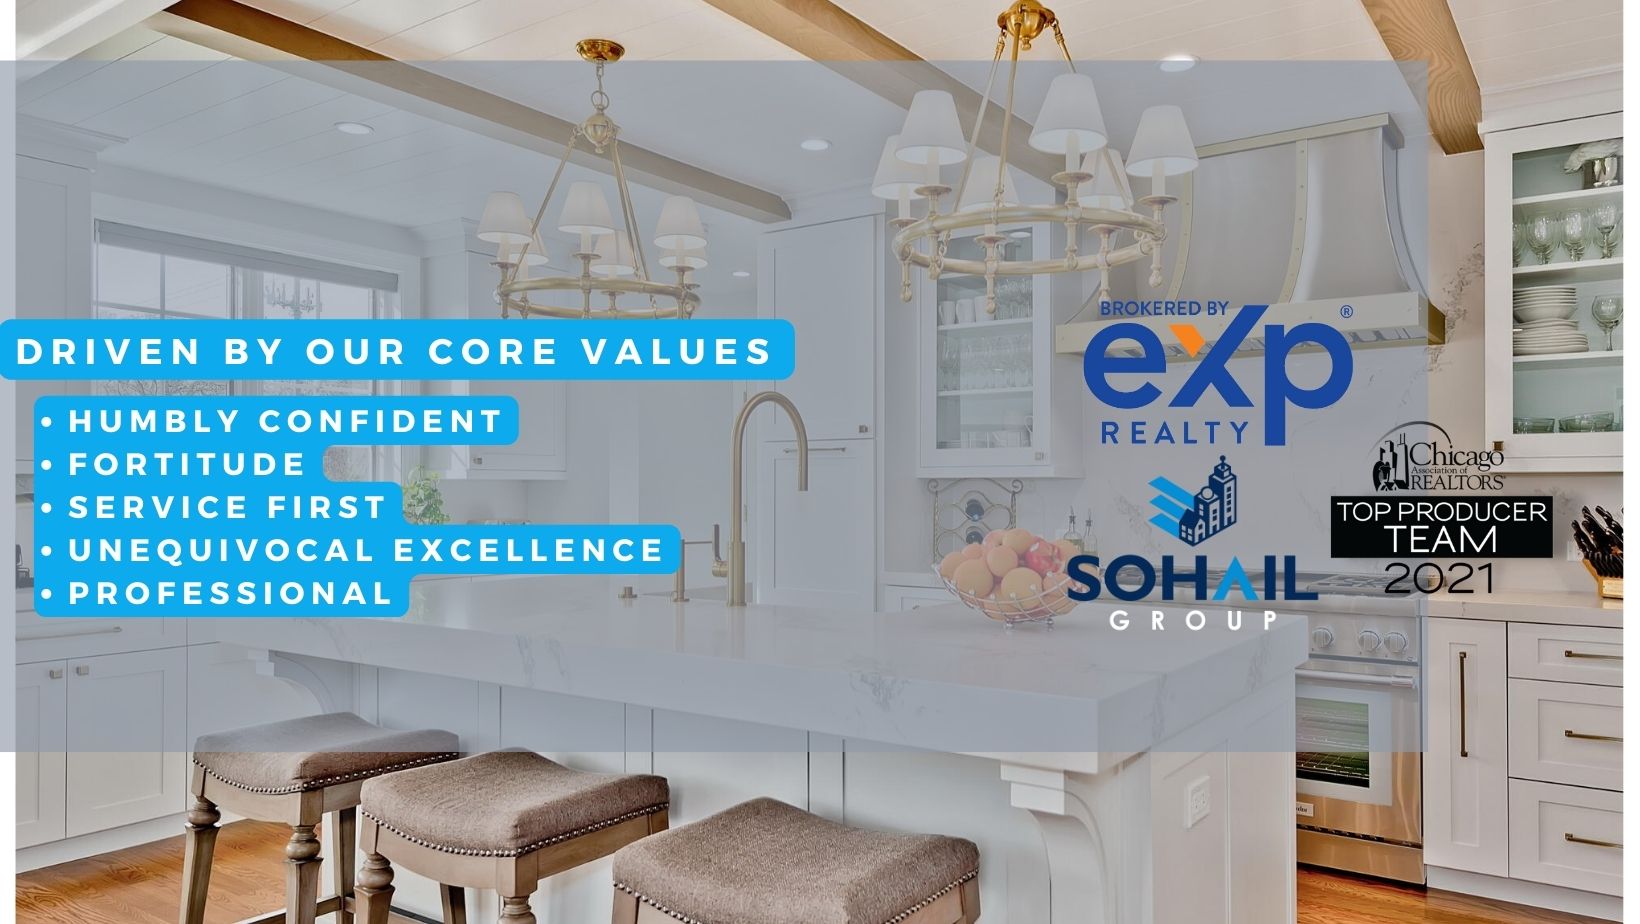 Sohail Group Sponsored by eXp Realty reviews | 6348 N. Cicero Avenue - Chicago IL